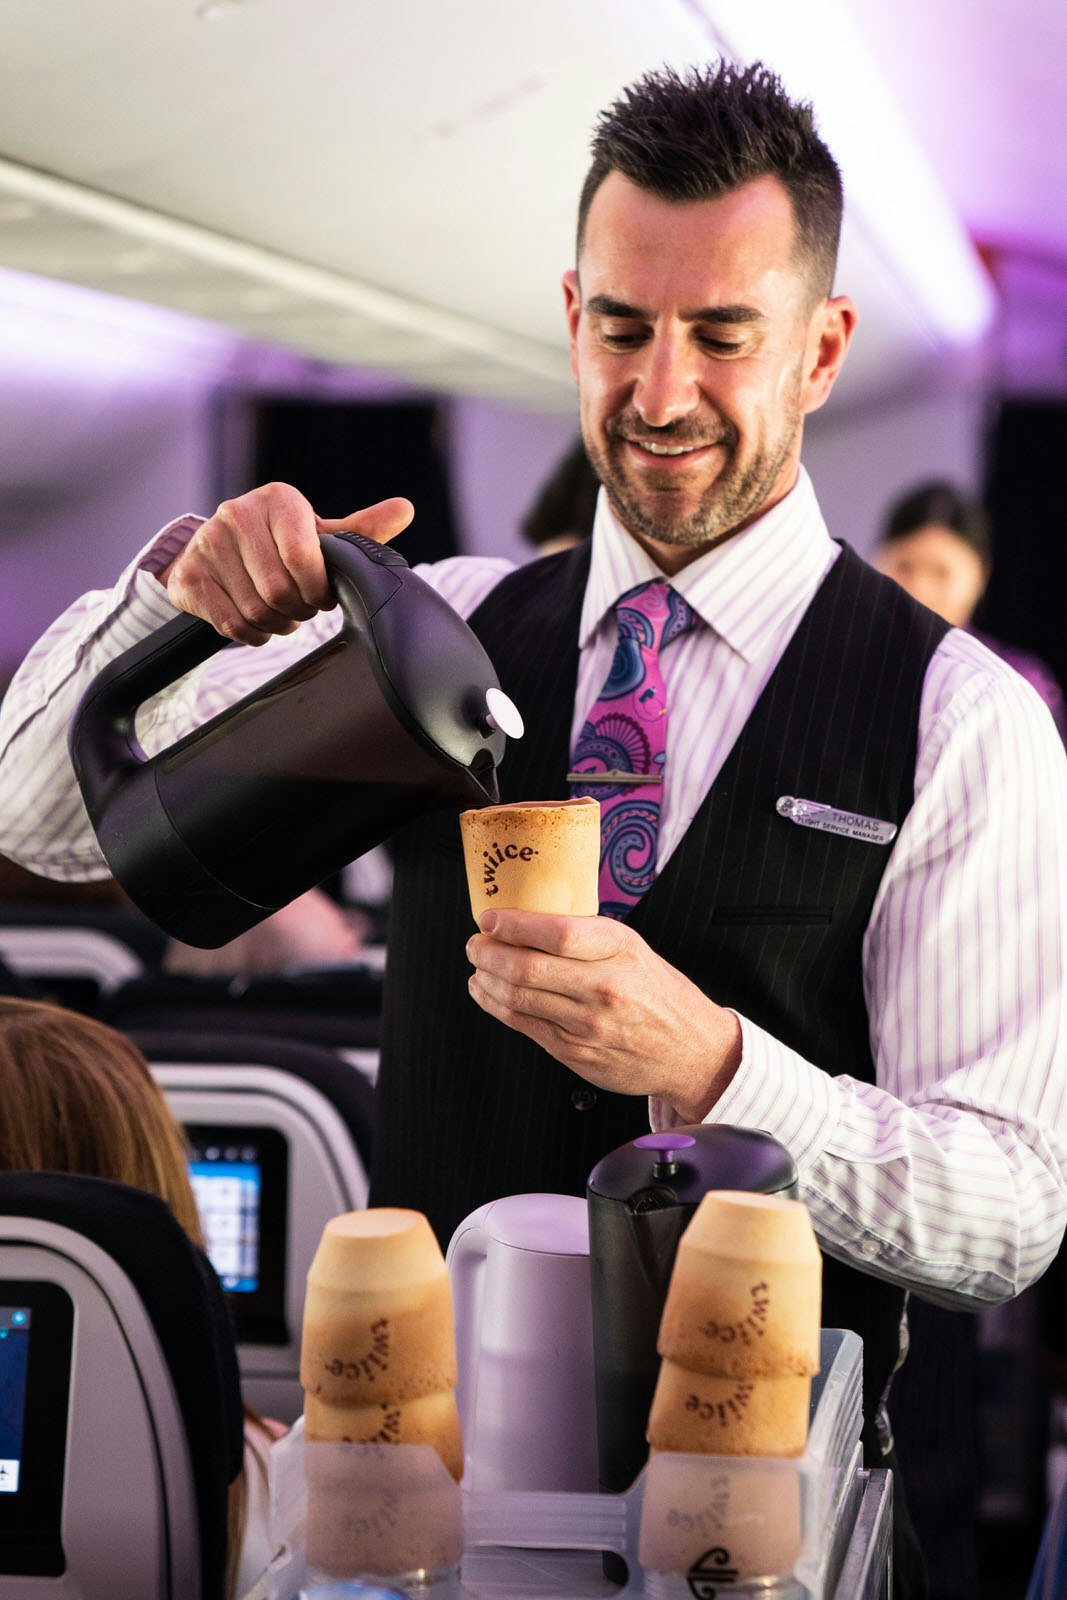 An Air New Zealand air steward pouring coffee into an edible biscuit cup on board.